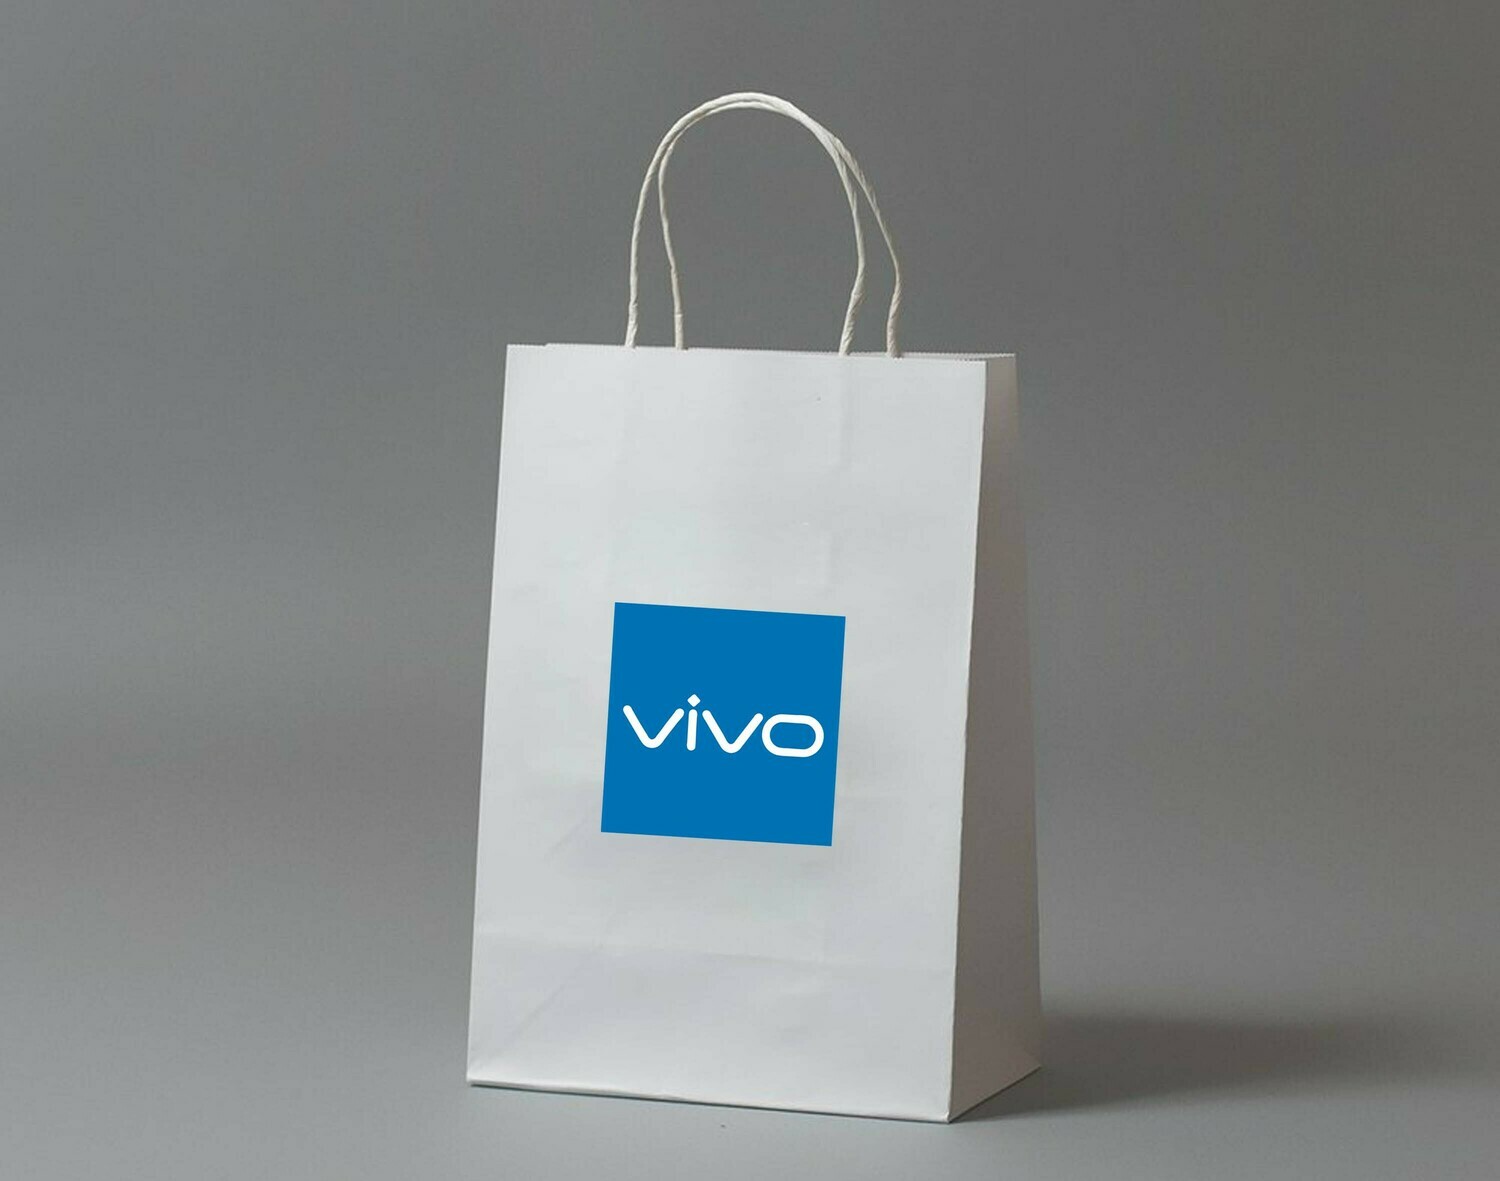 ITC white Paper durable printed bags 16 w X 12 h x 4 b (inch) 250 GSM